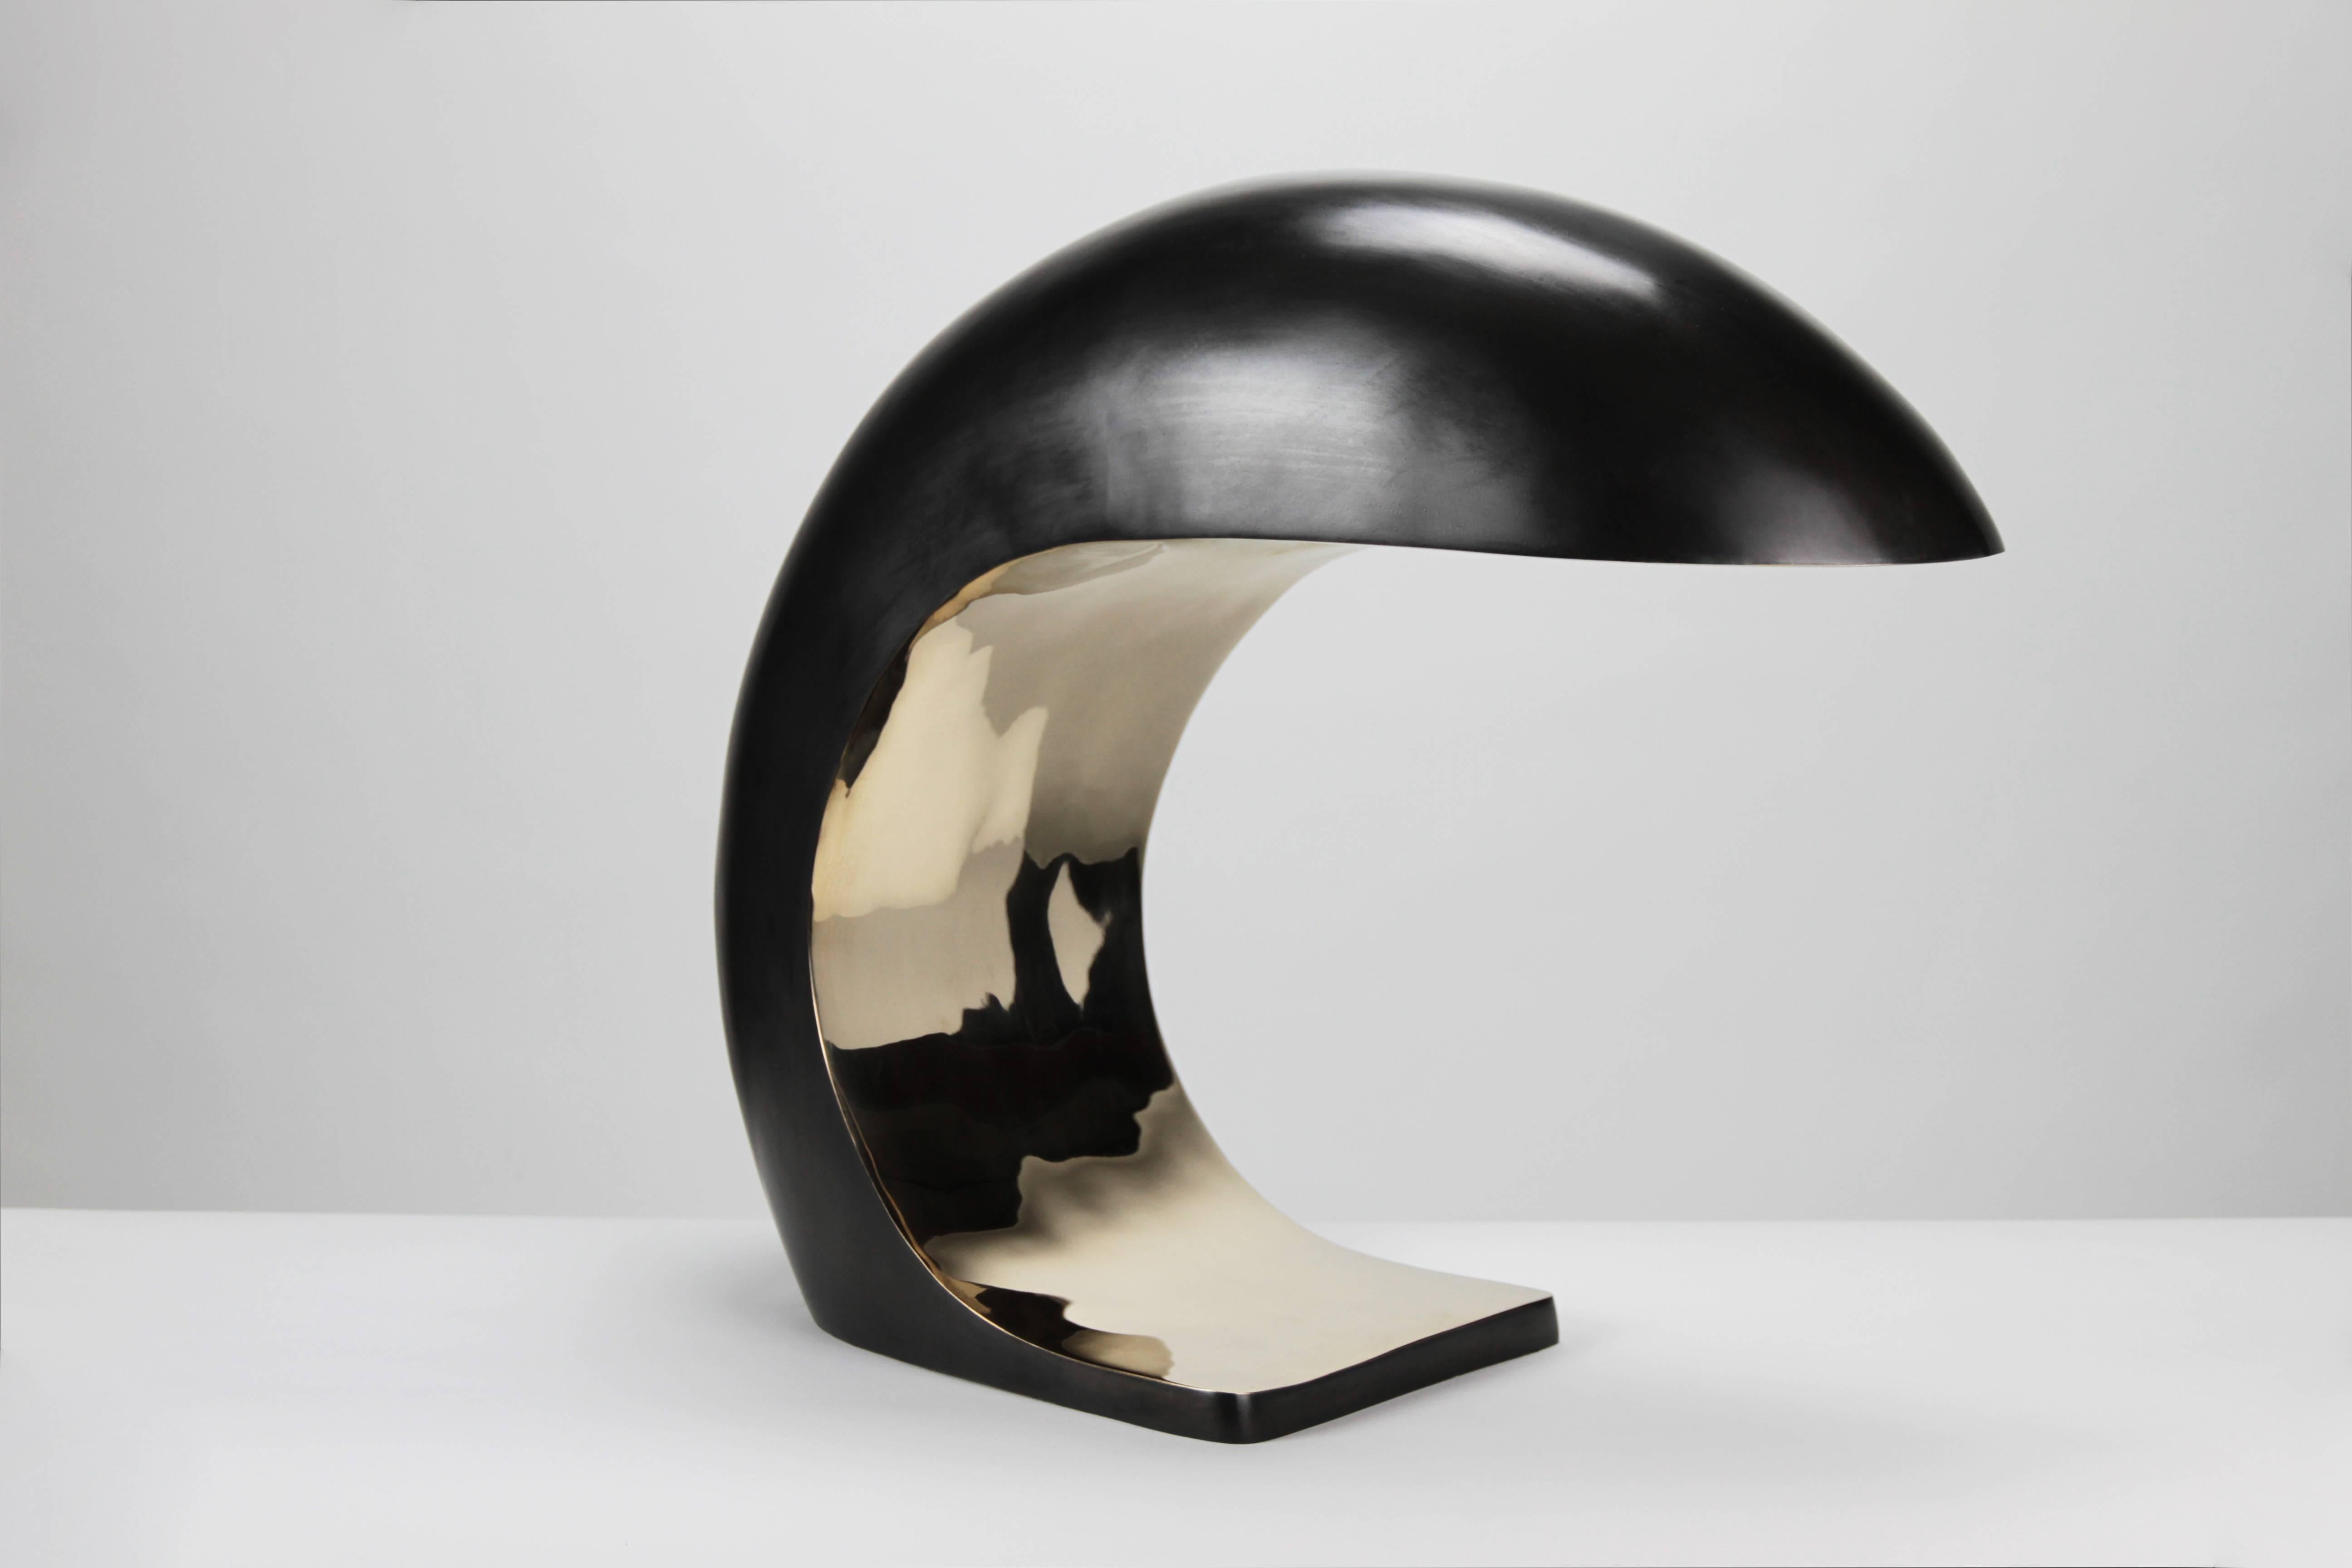 (Imperfect model)

The NAUTILUS lamp is inspired by midcentury Italian design.
It is cast bronze and weighs up to 28 pounds. The outer shell has a blackened patina and the face is high polished to a mirrored finish.
 
The NAUTILUS illuminates